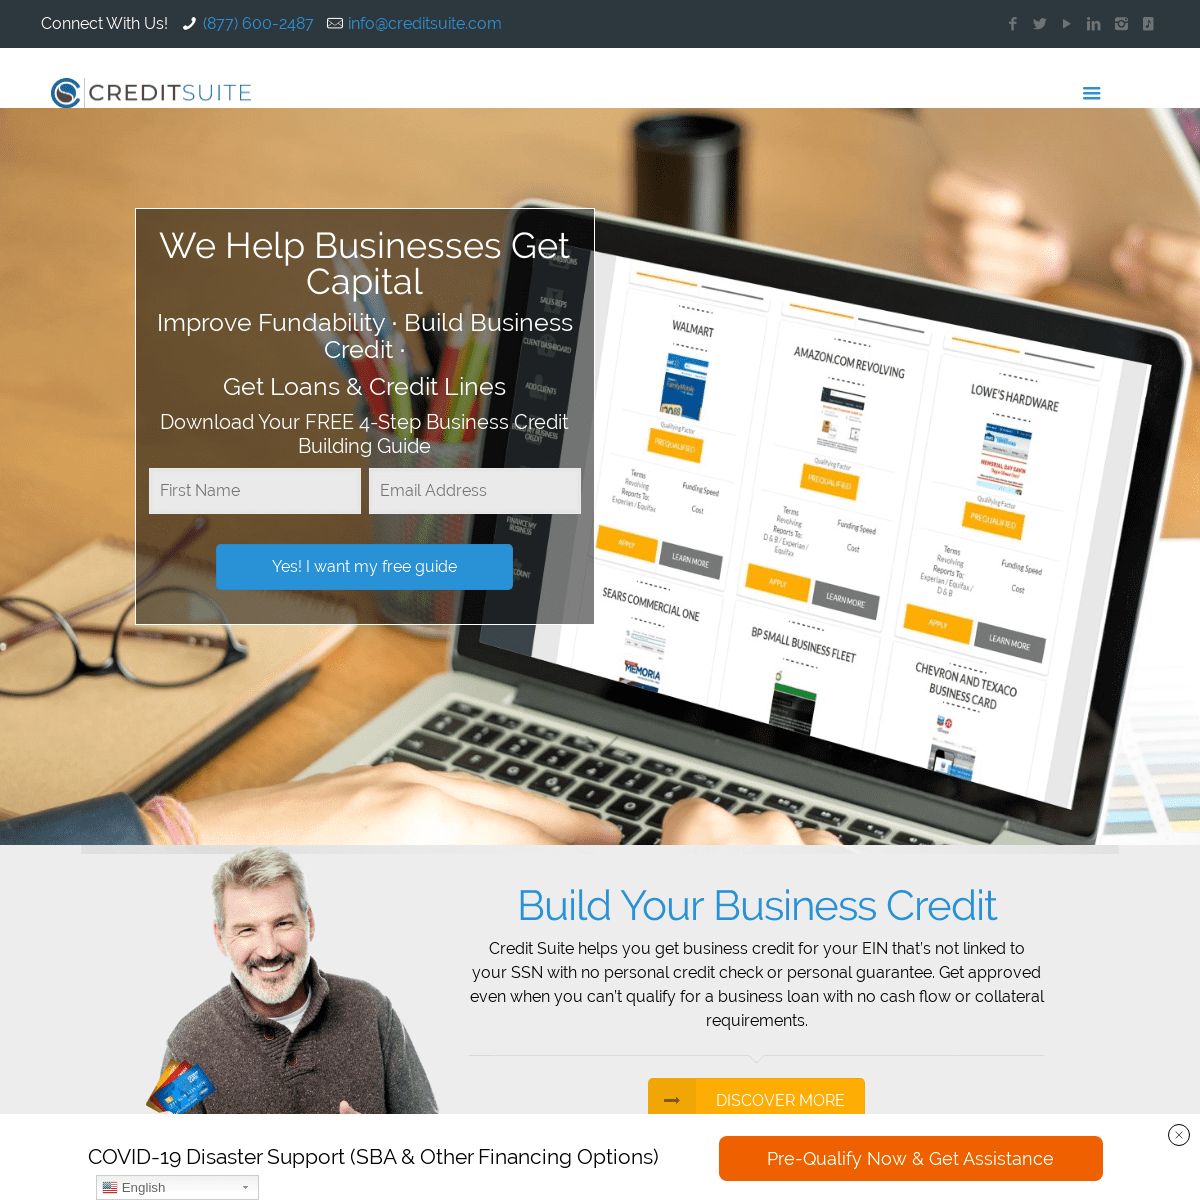 A complete backup of creditsuite.com